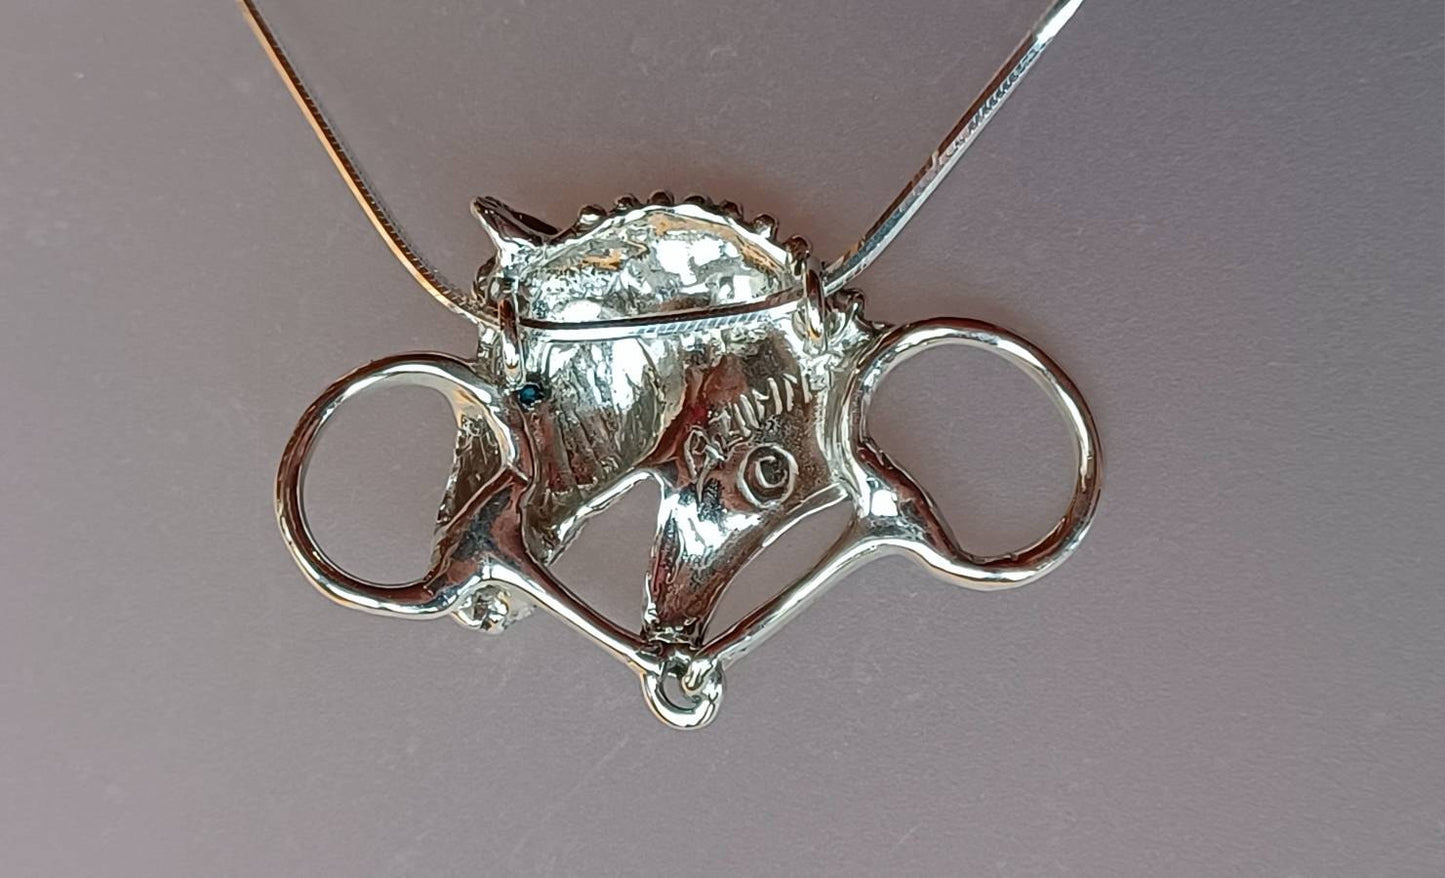 Dressage Horse and Snaffle Bit Pendant and Chain Sterling Silver.  Forge Hill Sculpture